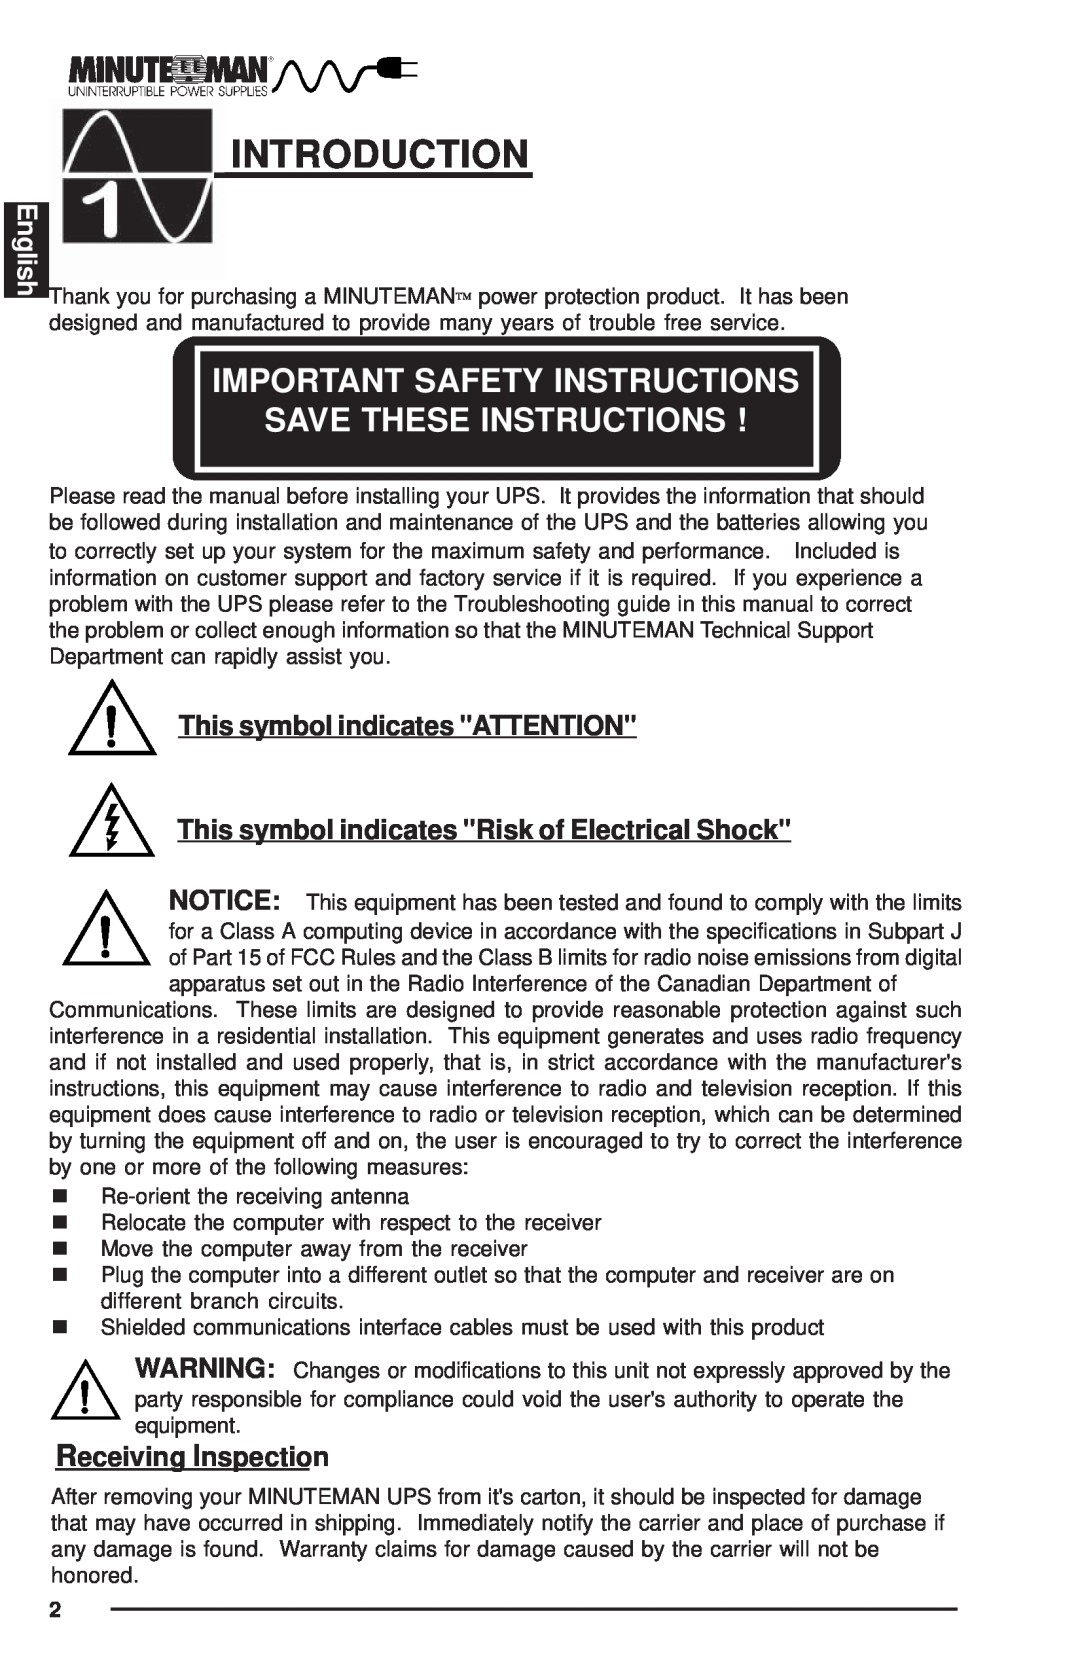 Minuteman UPS MCP-E Introduction, Important Safety Instructions Save These Instructions, English, Receiving Inspection 